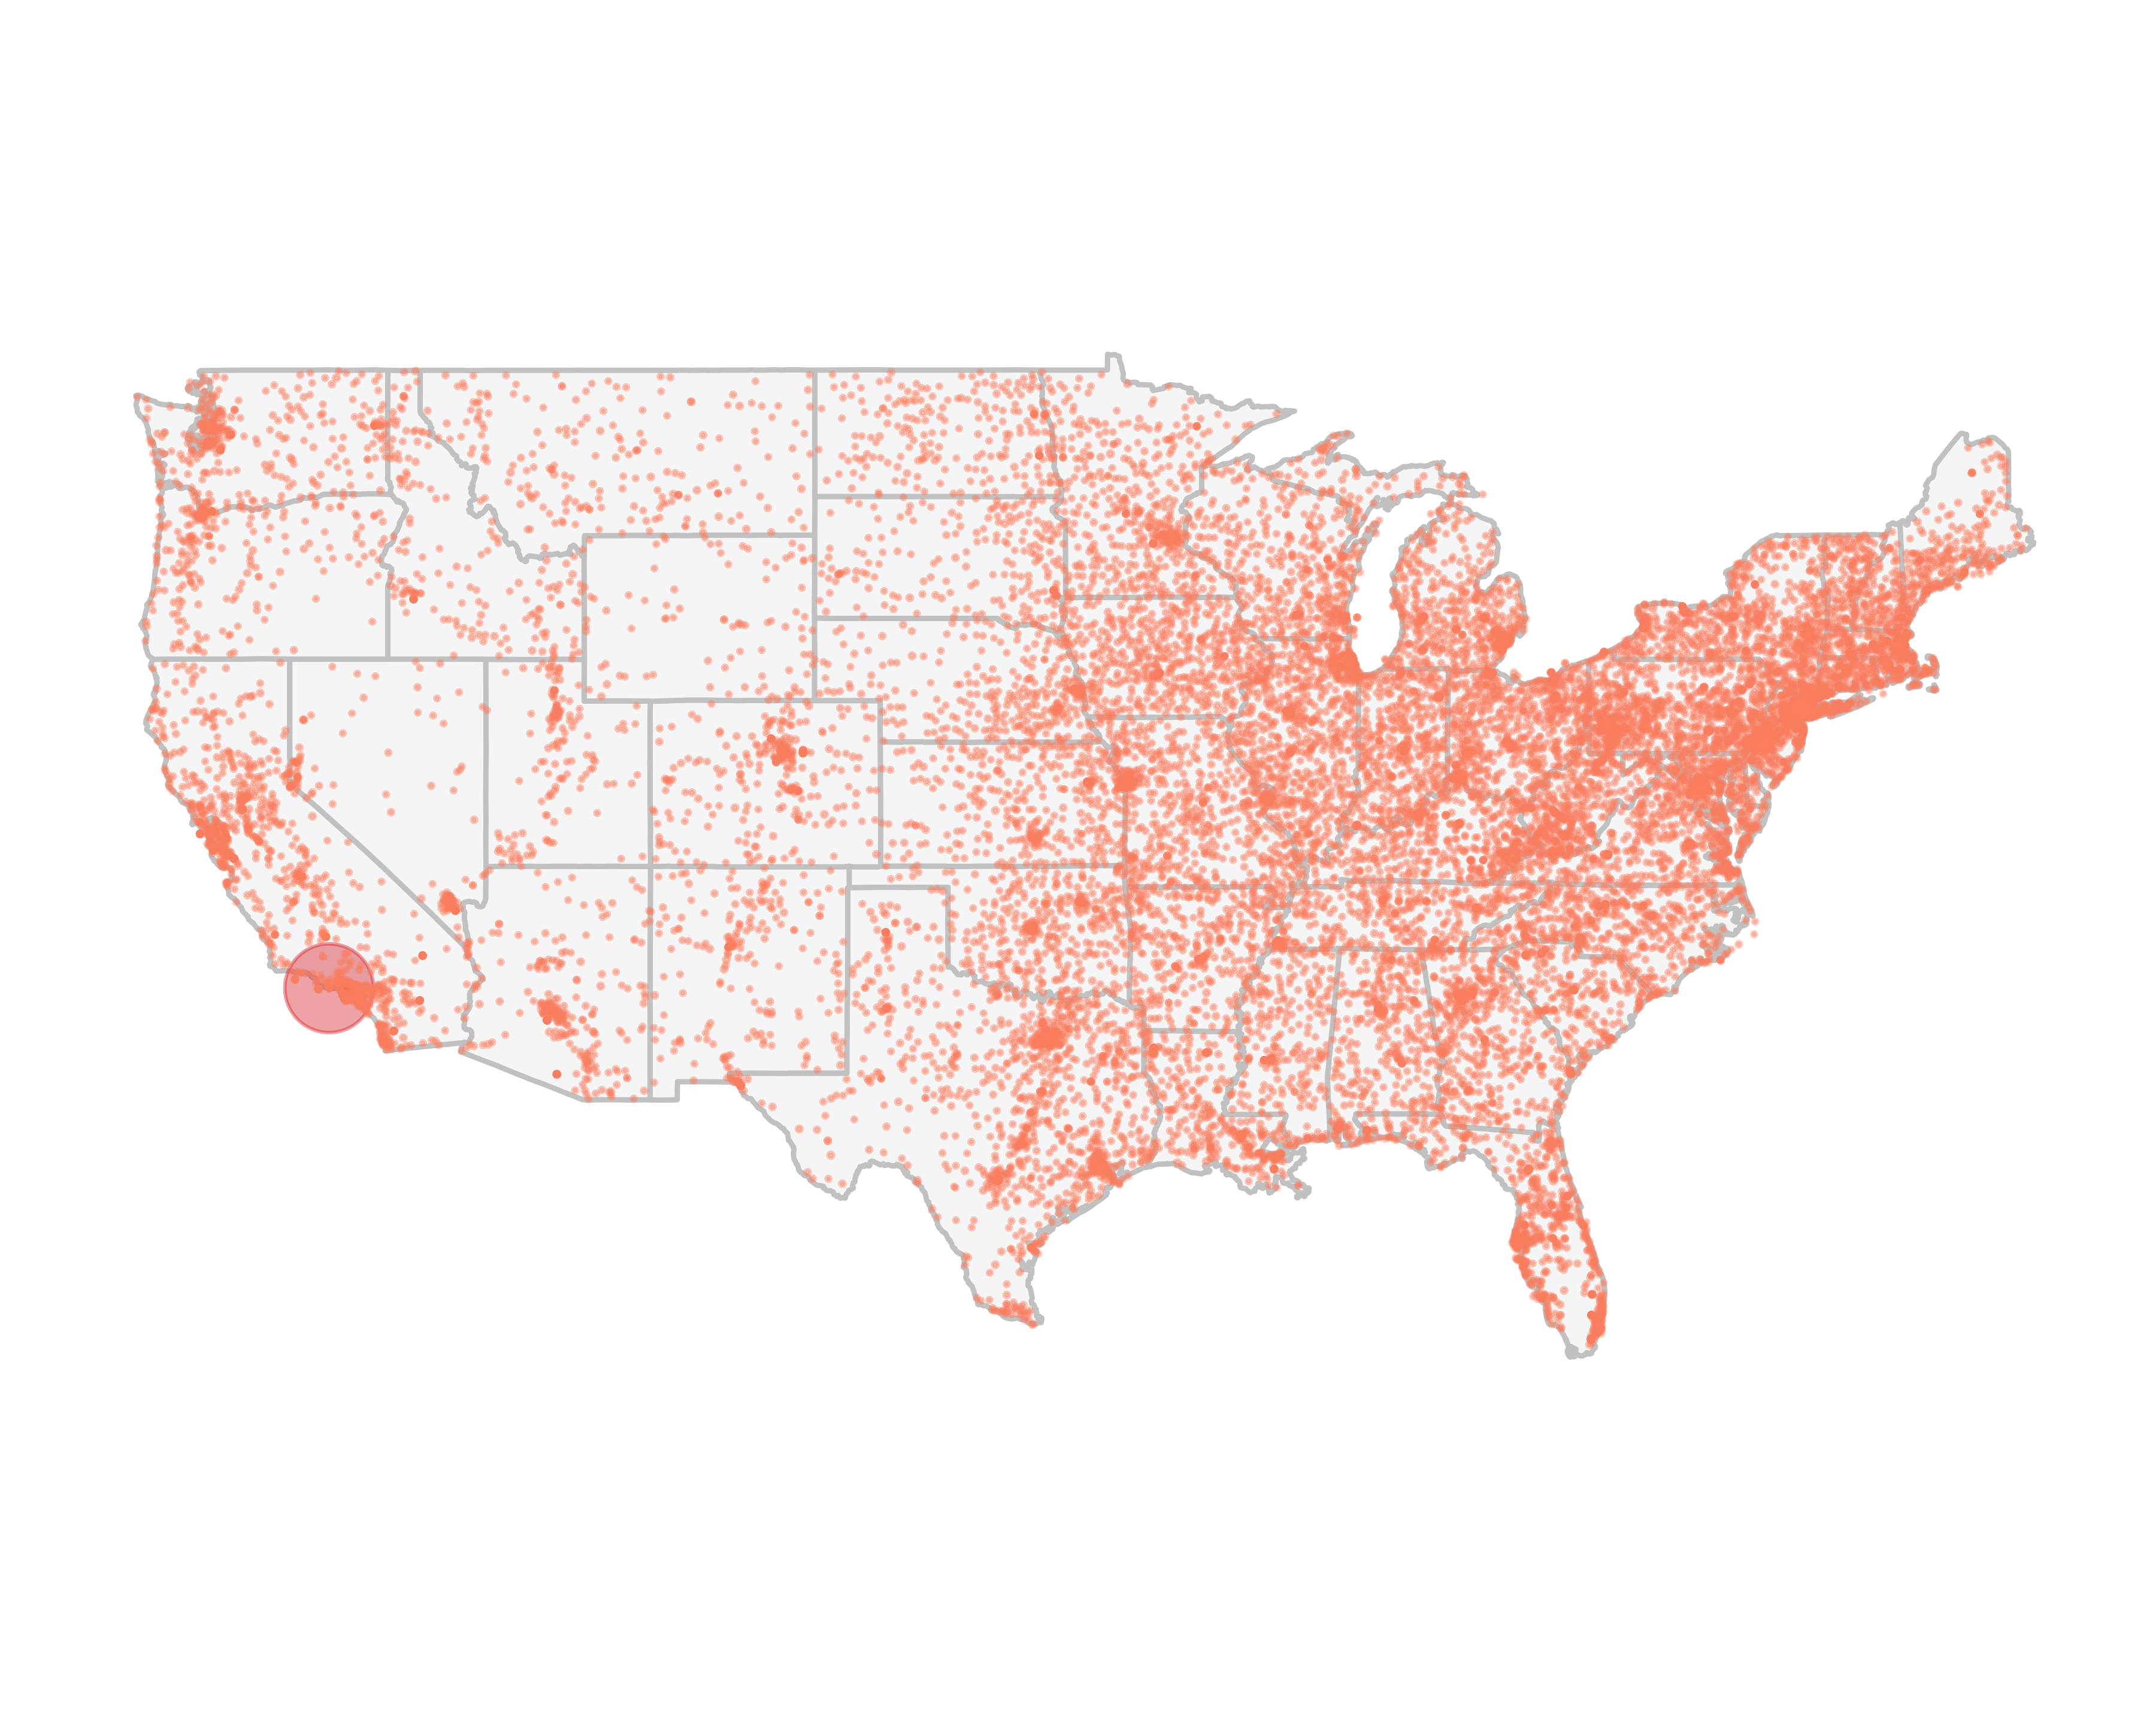 Number of prospects by ZIP code on the U.S. map, colored by density